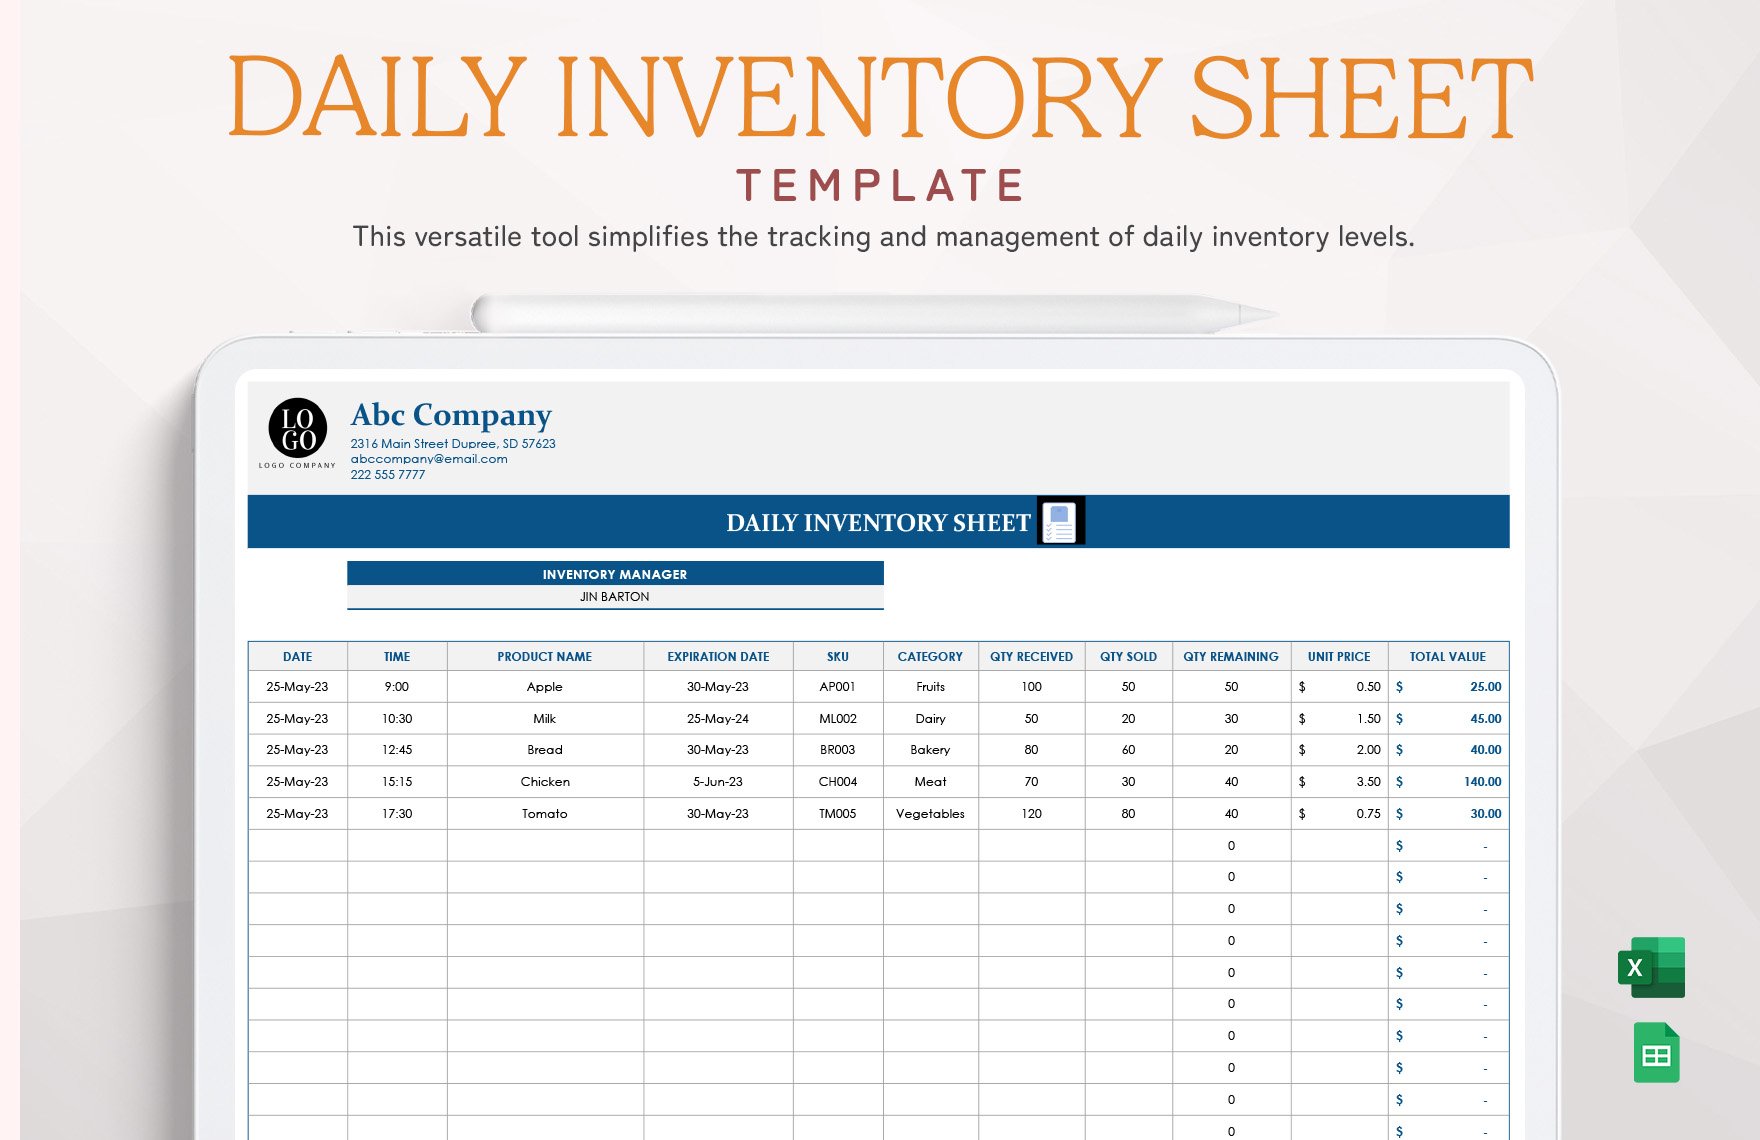 Daily Inventory Sheet Template in Excel, Google Sheets